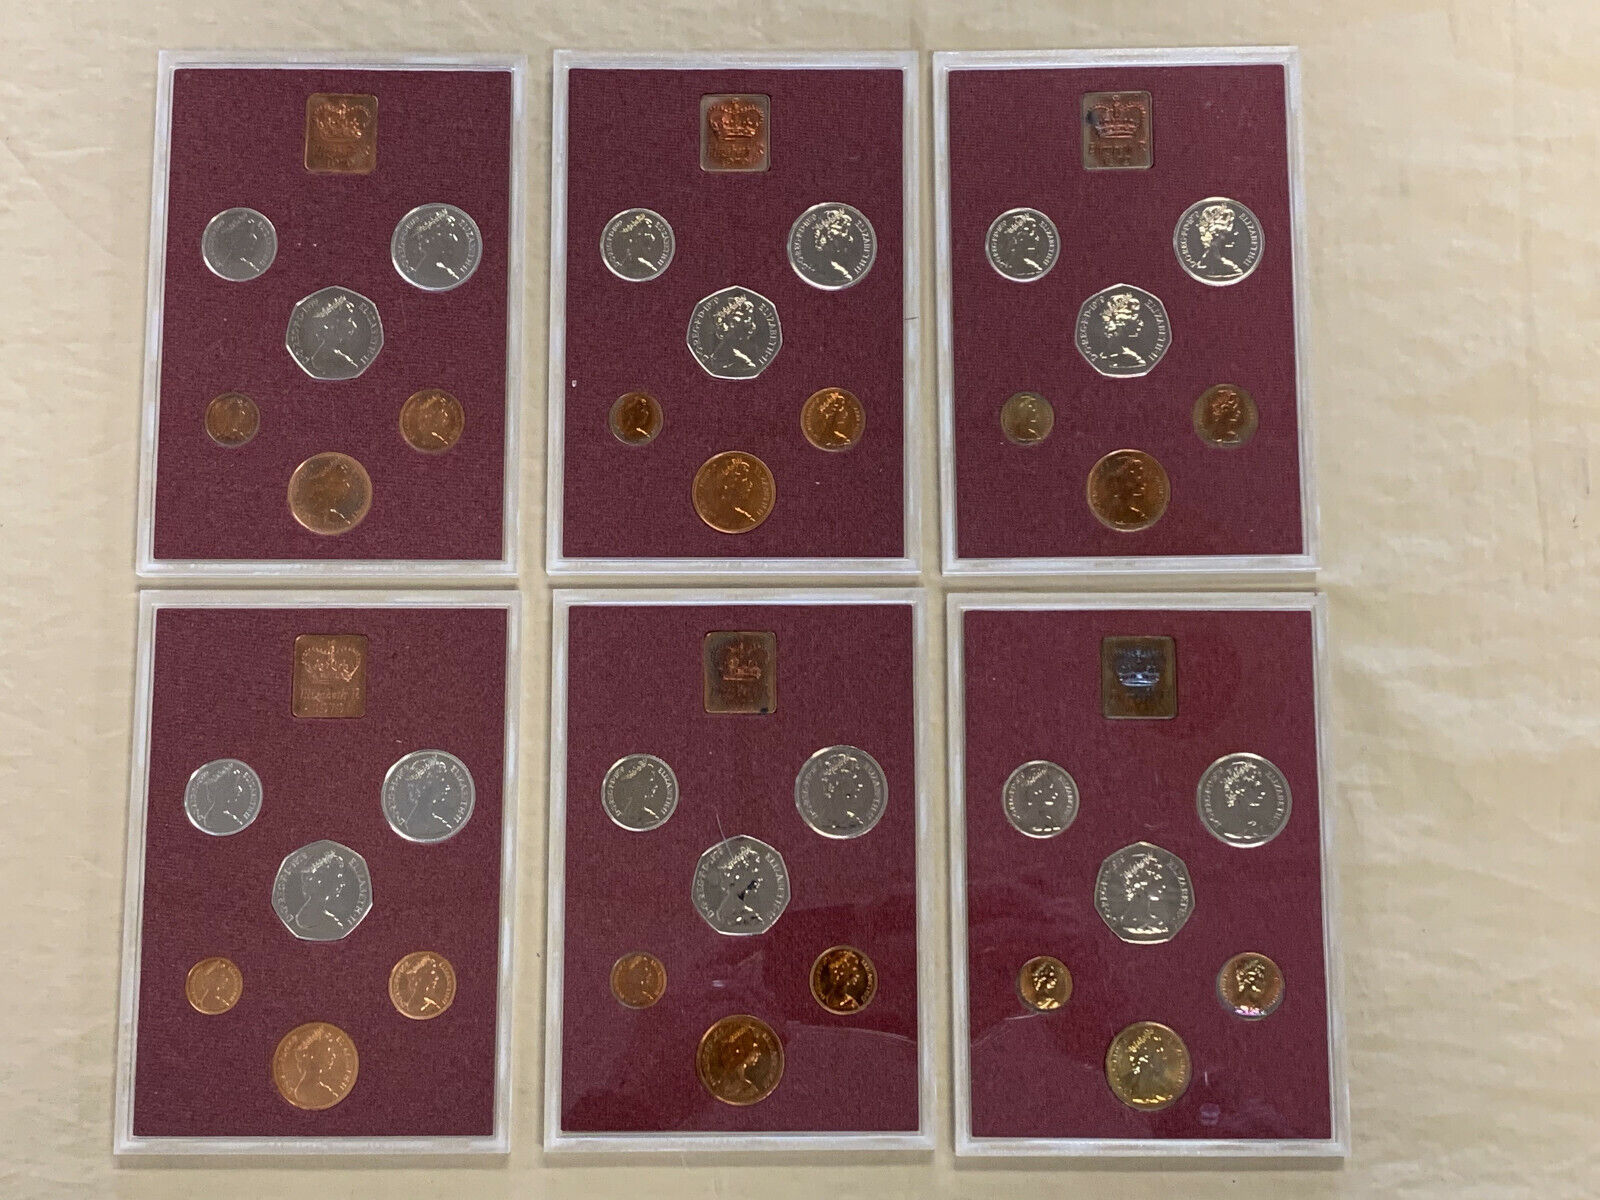 6 total 1979 UK United Kingdom 6 Coin Proof Sets in Plastic Cases - KM# PS-35 * Без бренда - фотография #2